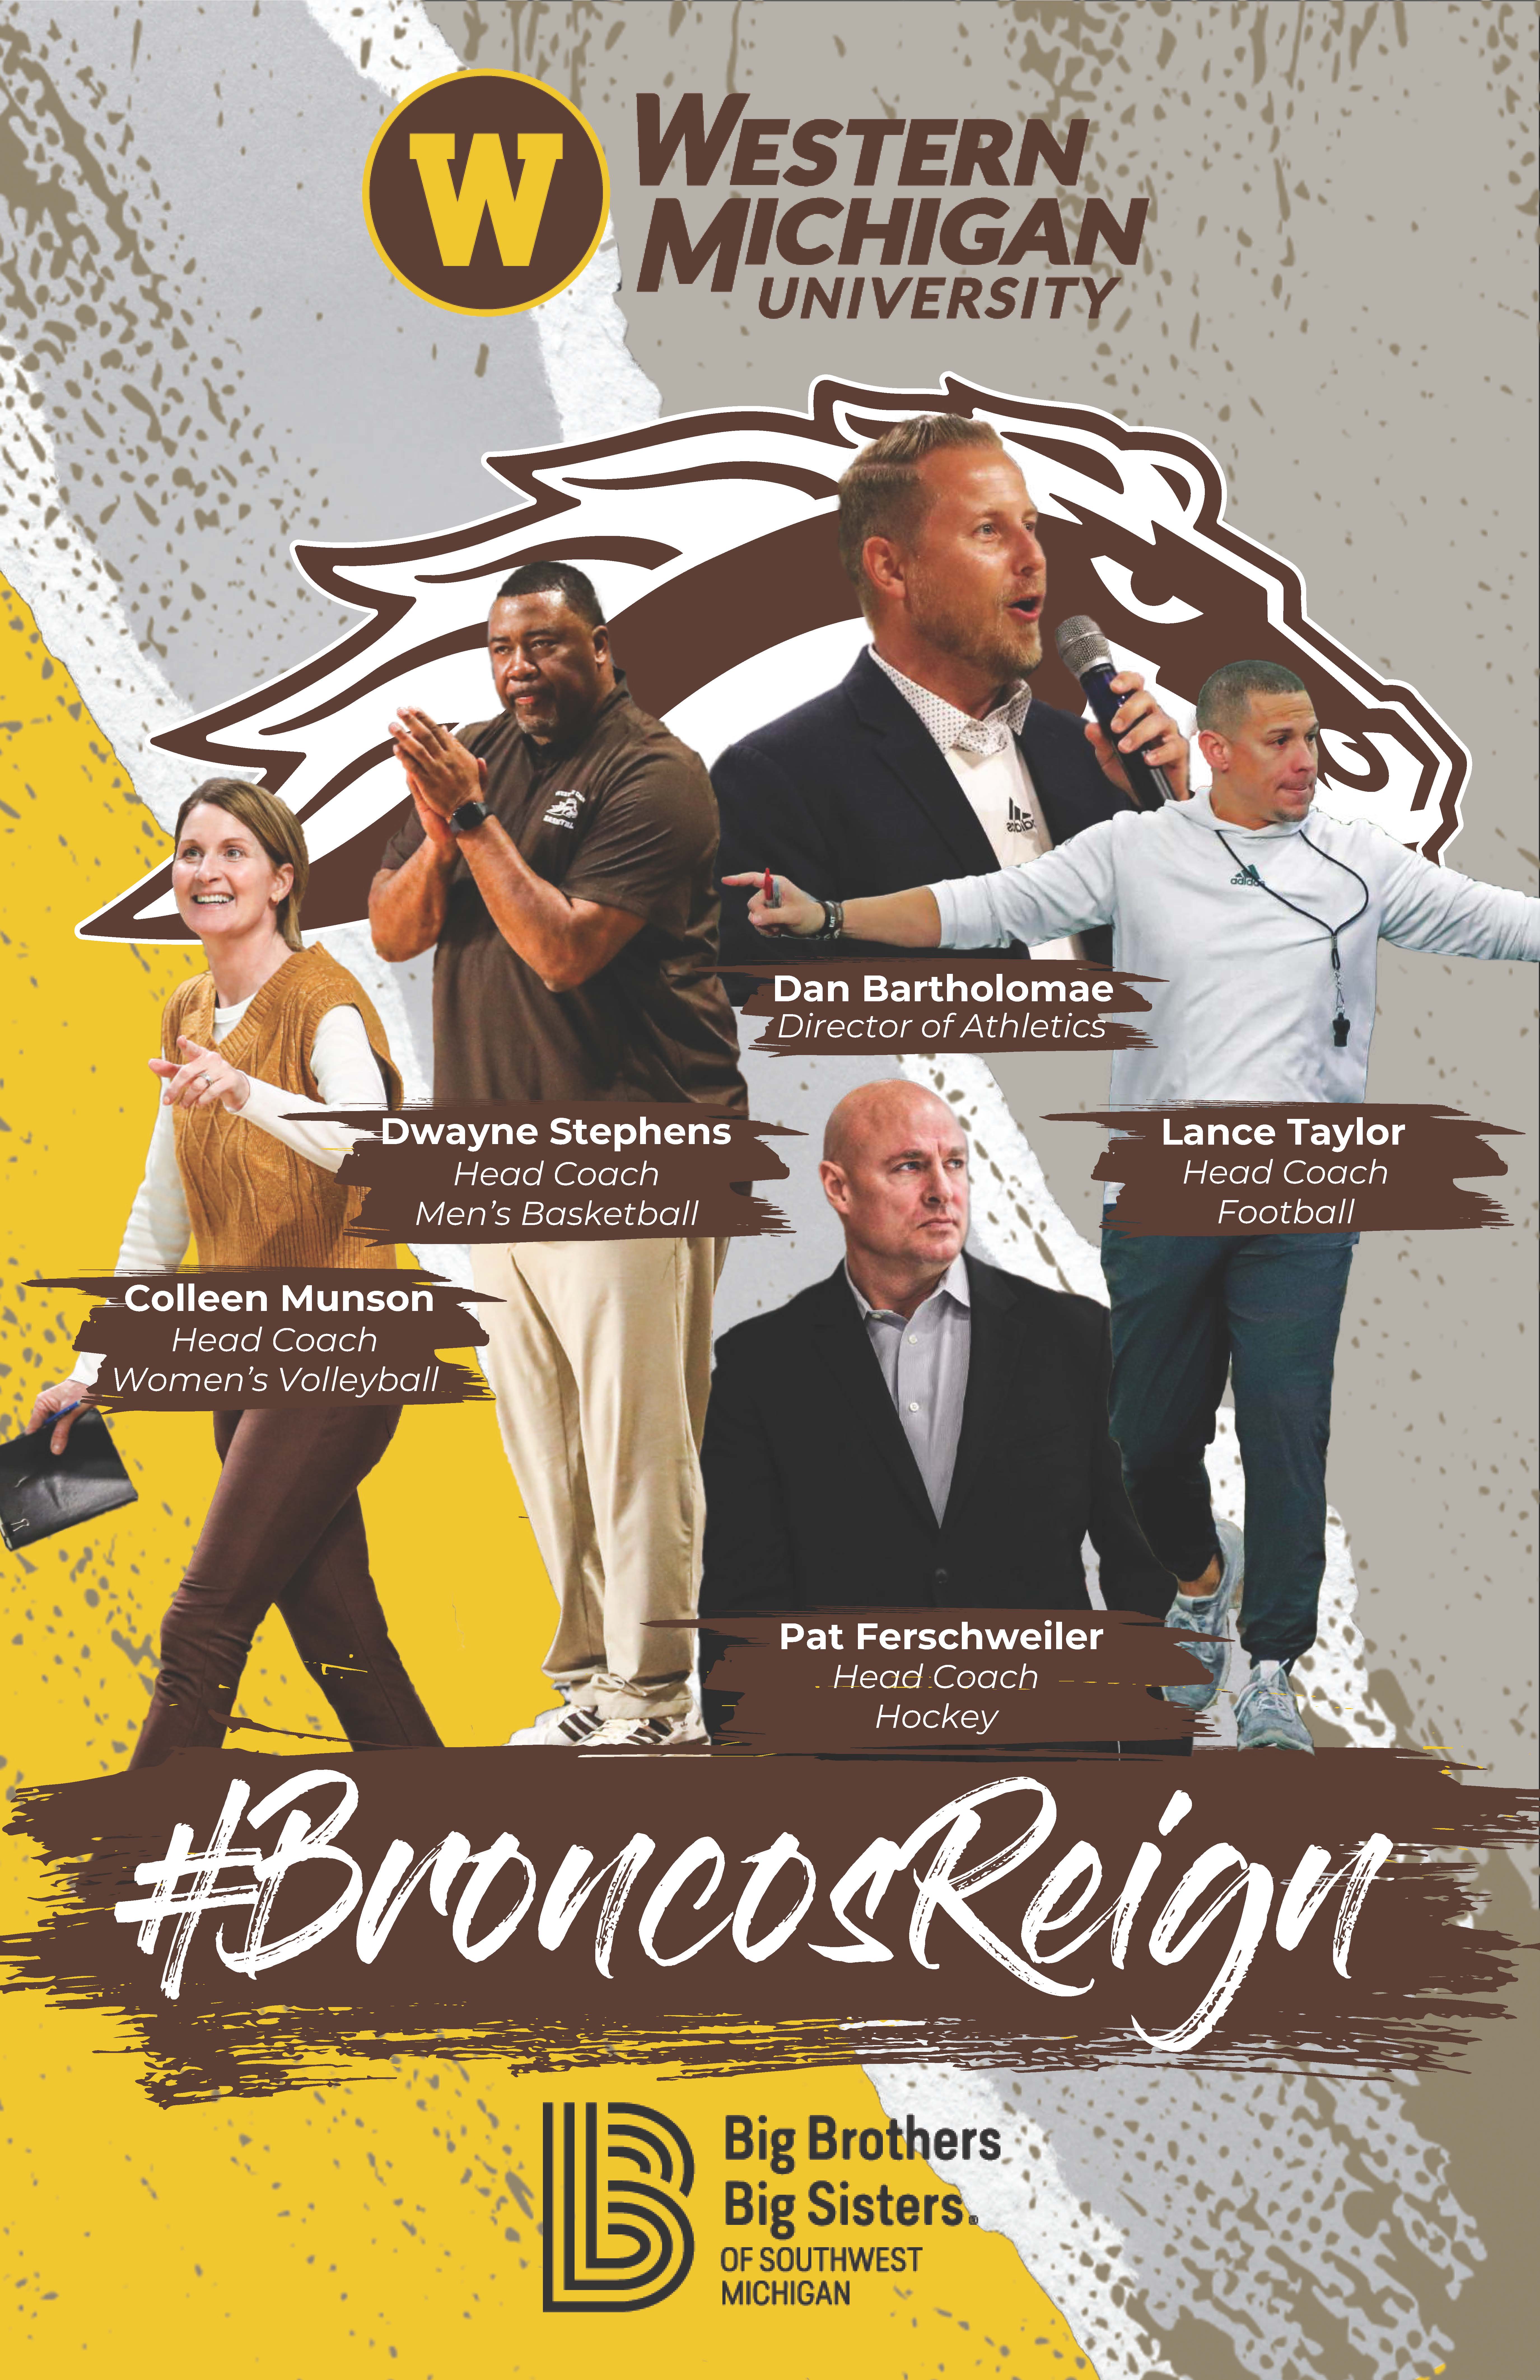 A graphic posted of 5 WMU sports coaches, with their names in front of them. In the background is the WMU Bronco logo. In the front are the words #BroncosReign